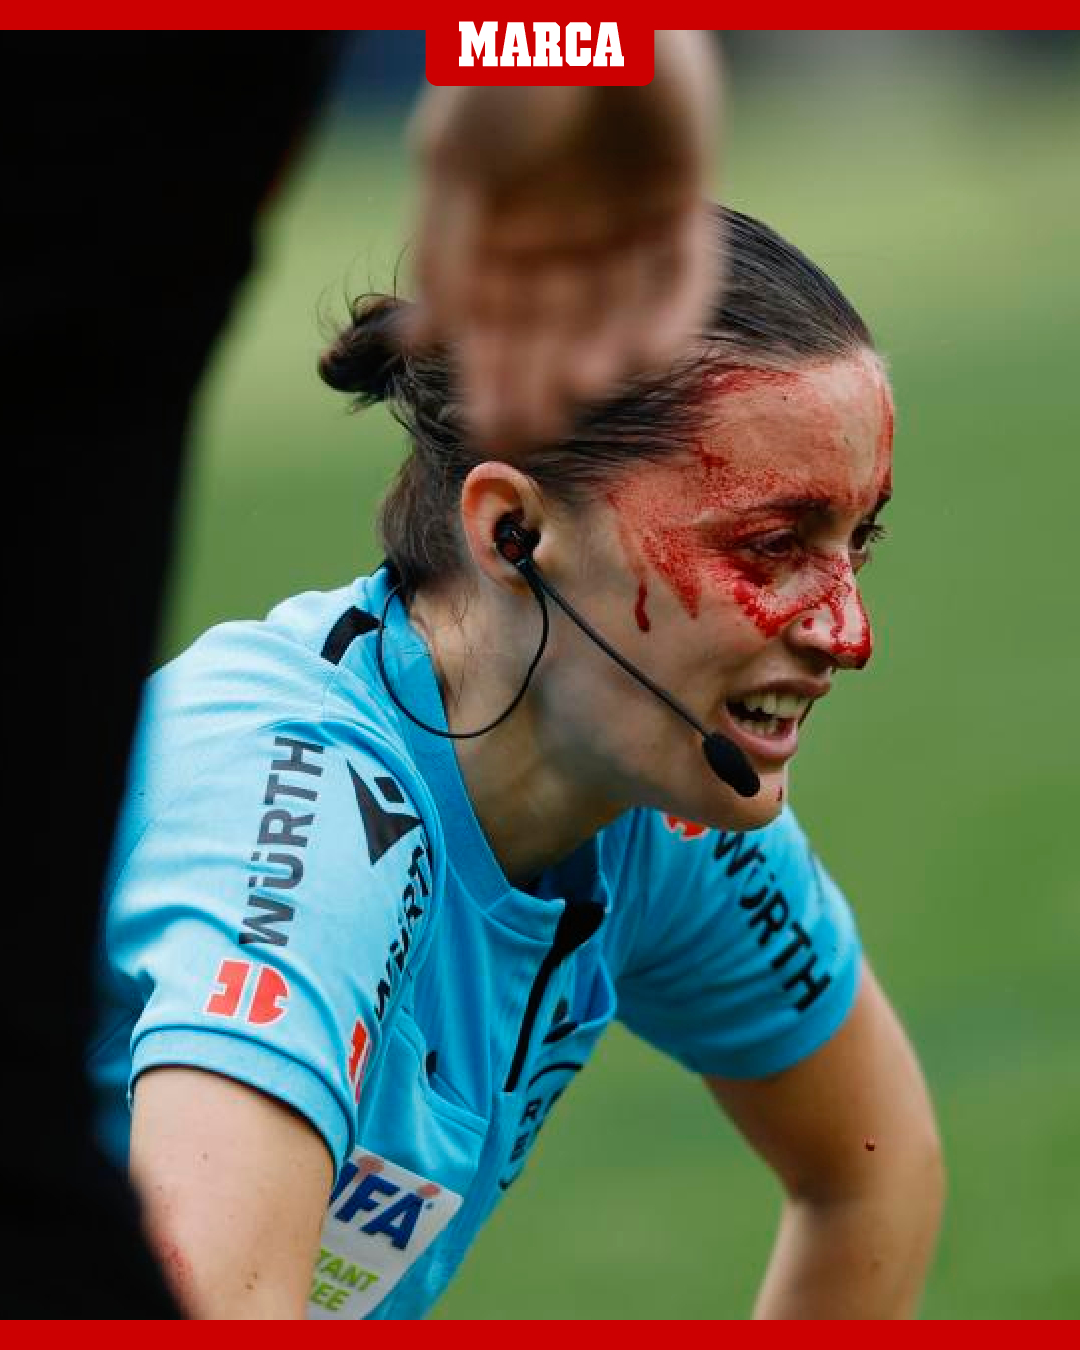 Lineswoman Guadalupe Porras left covered in blood after being hit by a CAMERA